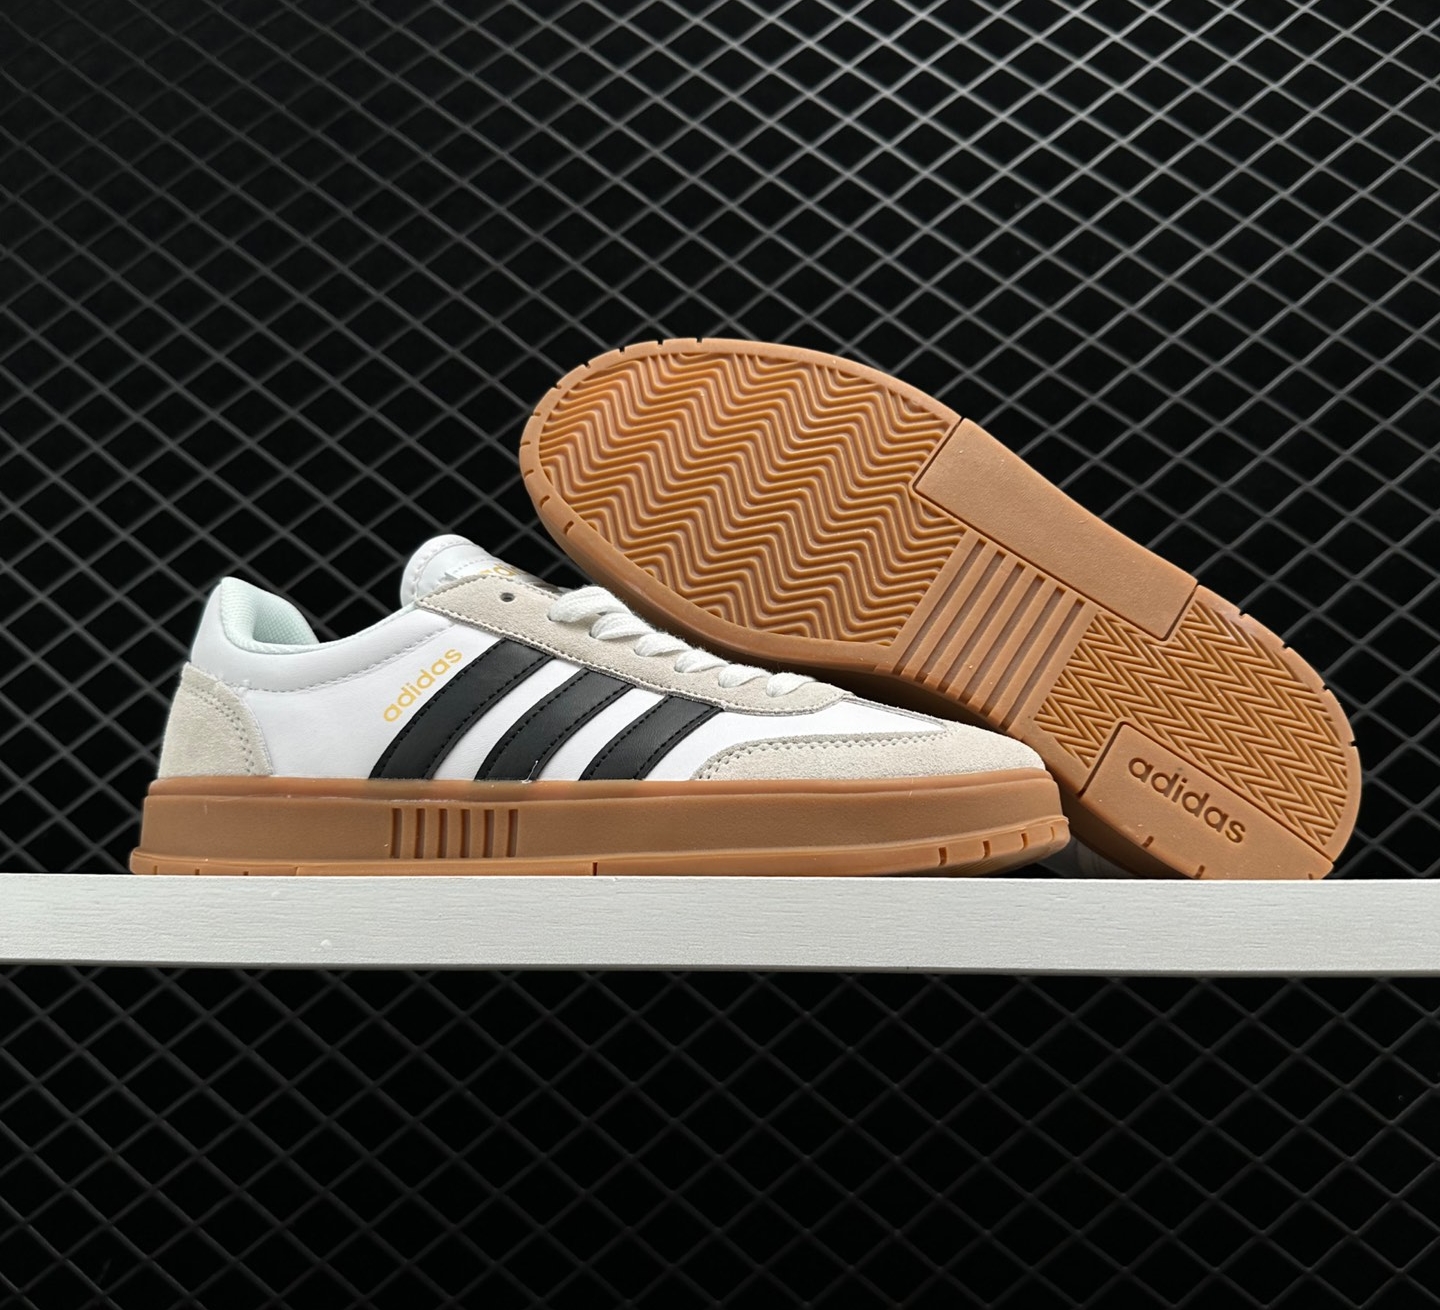 Adidas Neo Gradas White Gray Black Unisex FW3378 - Stylish and Classic Footwear with Unisex Appeal